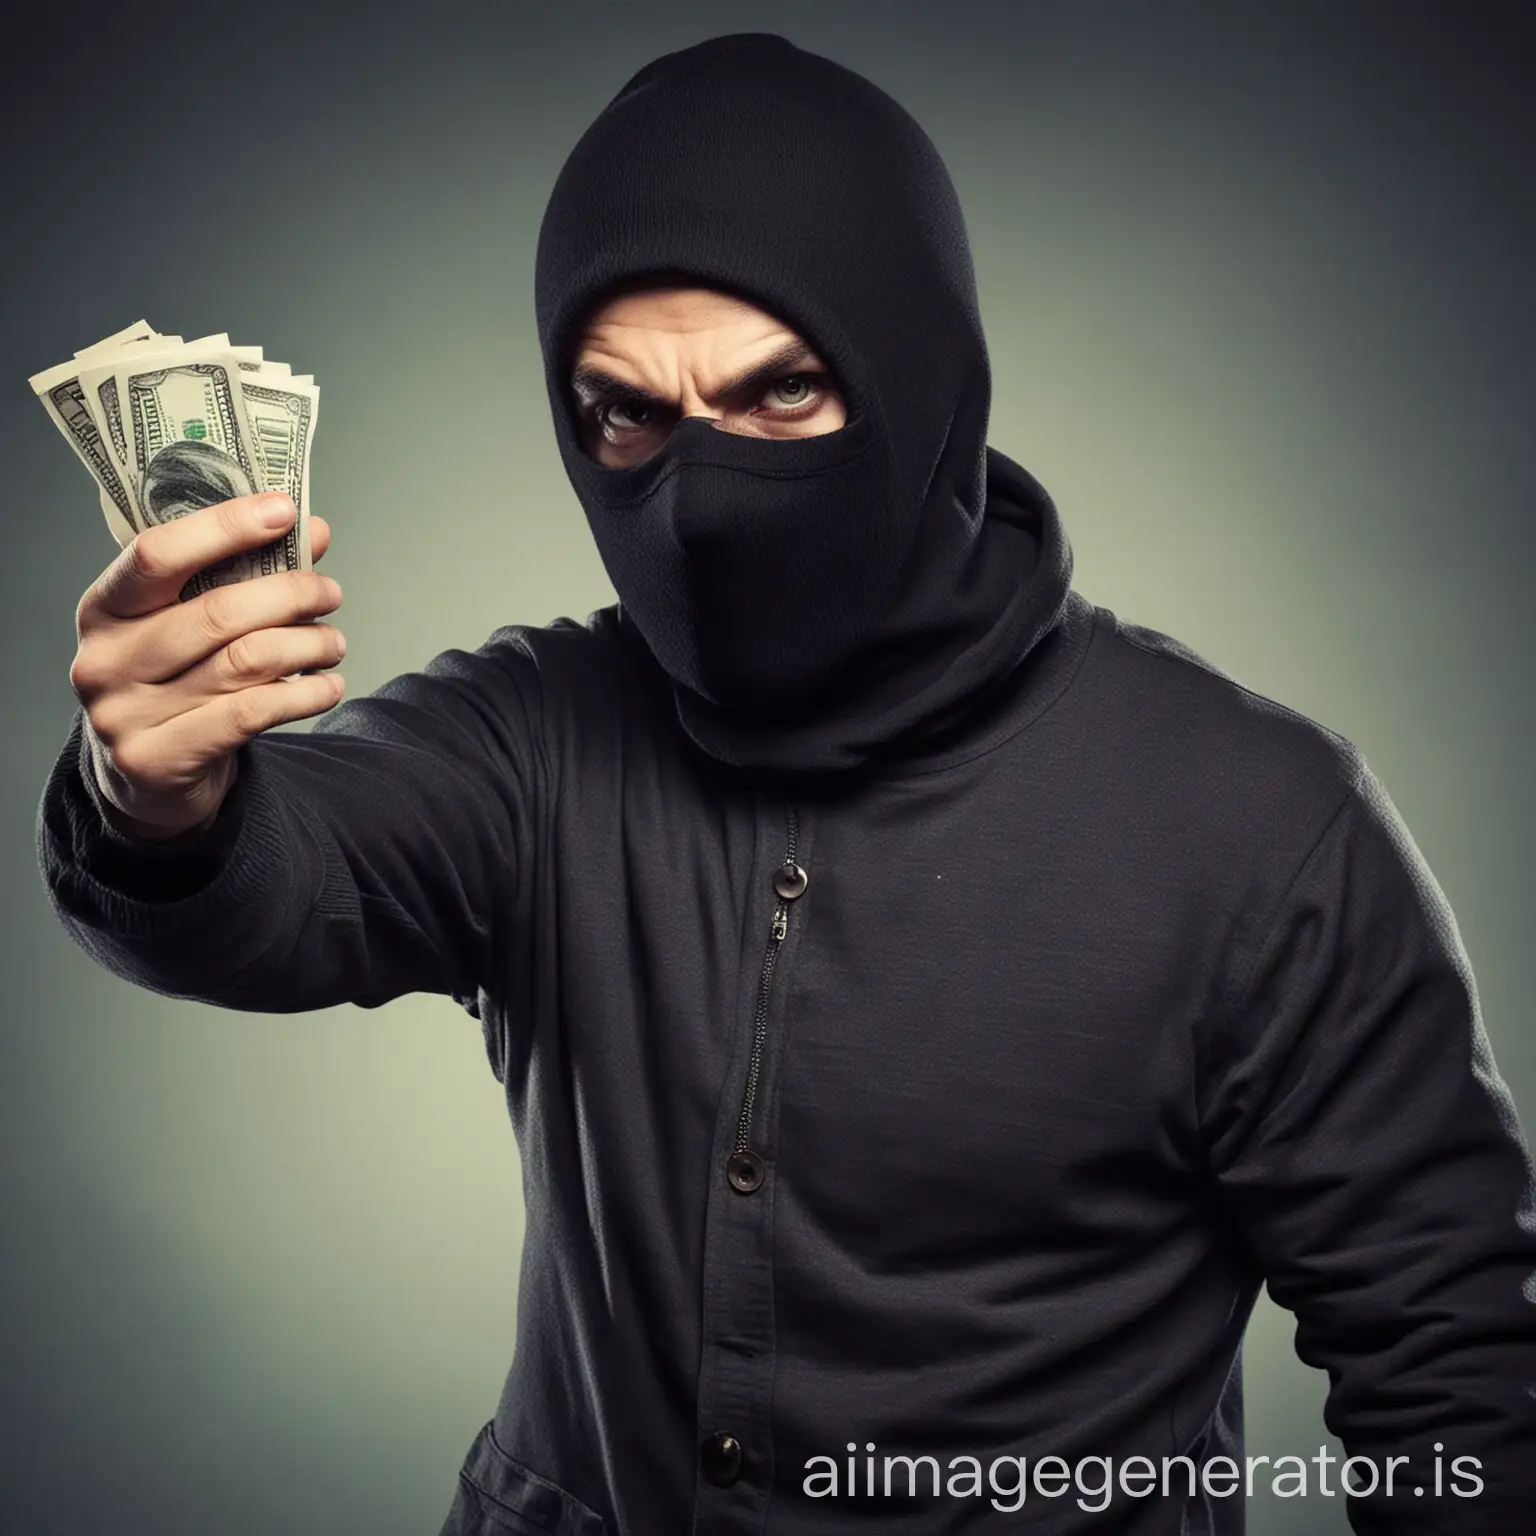 Robber 1: Hand over the cash, and nobody gets hurt!